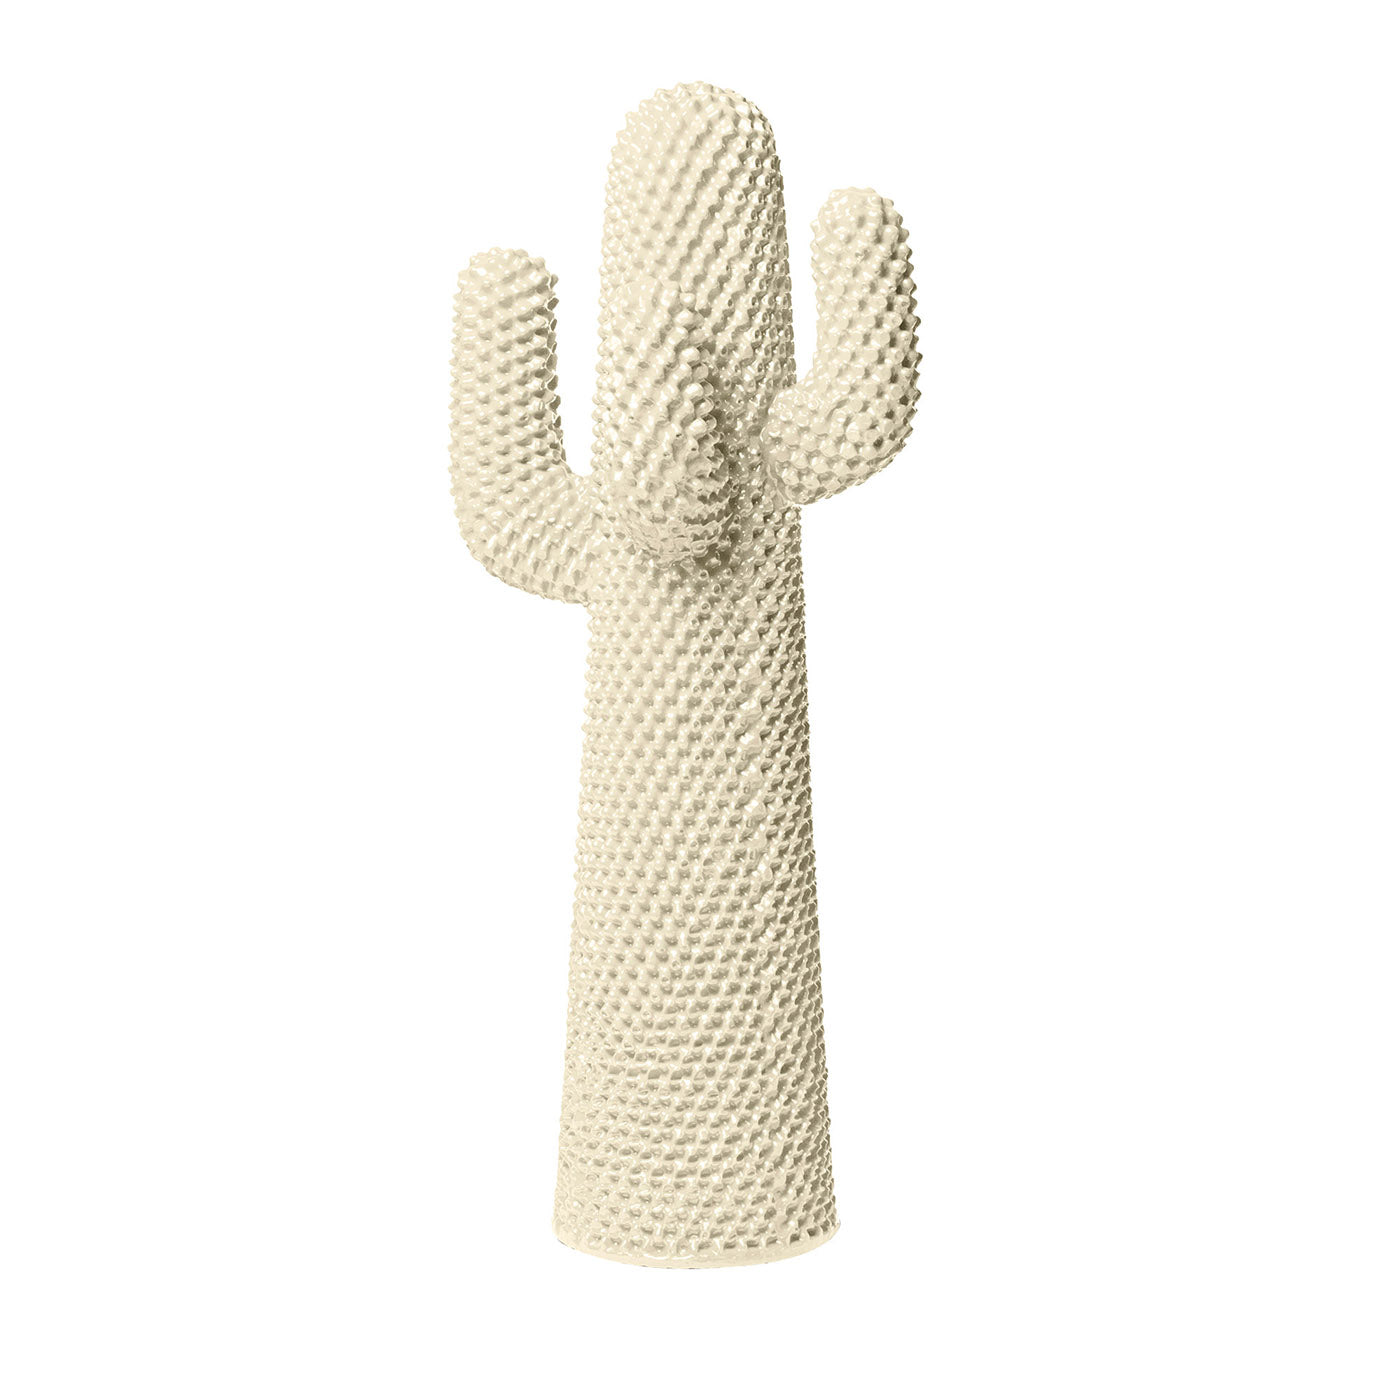 Another White Cactus Coat Stand by Drocco/Mello